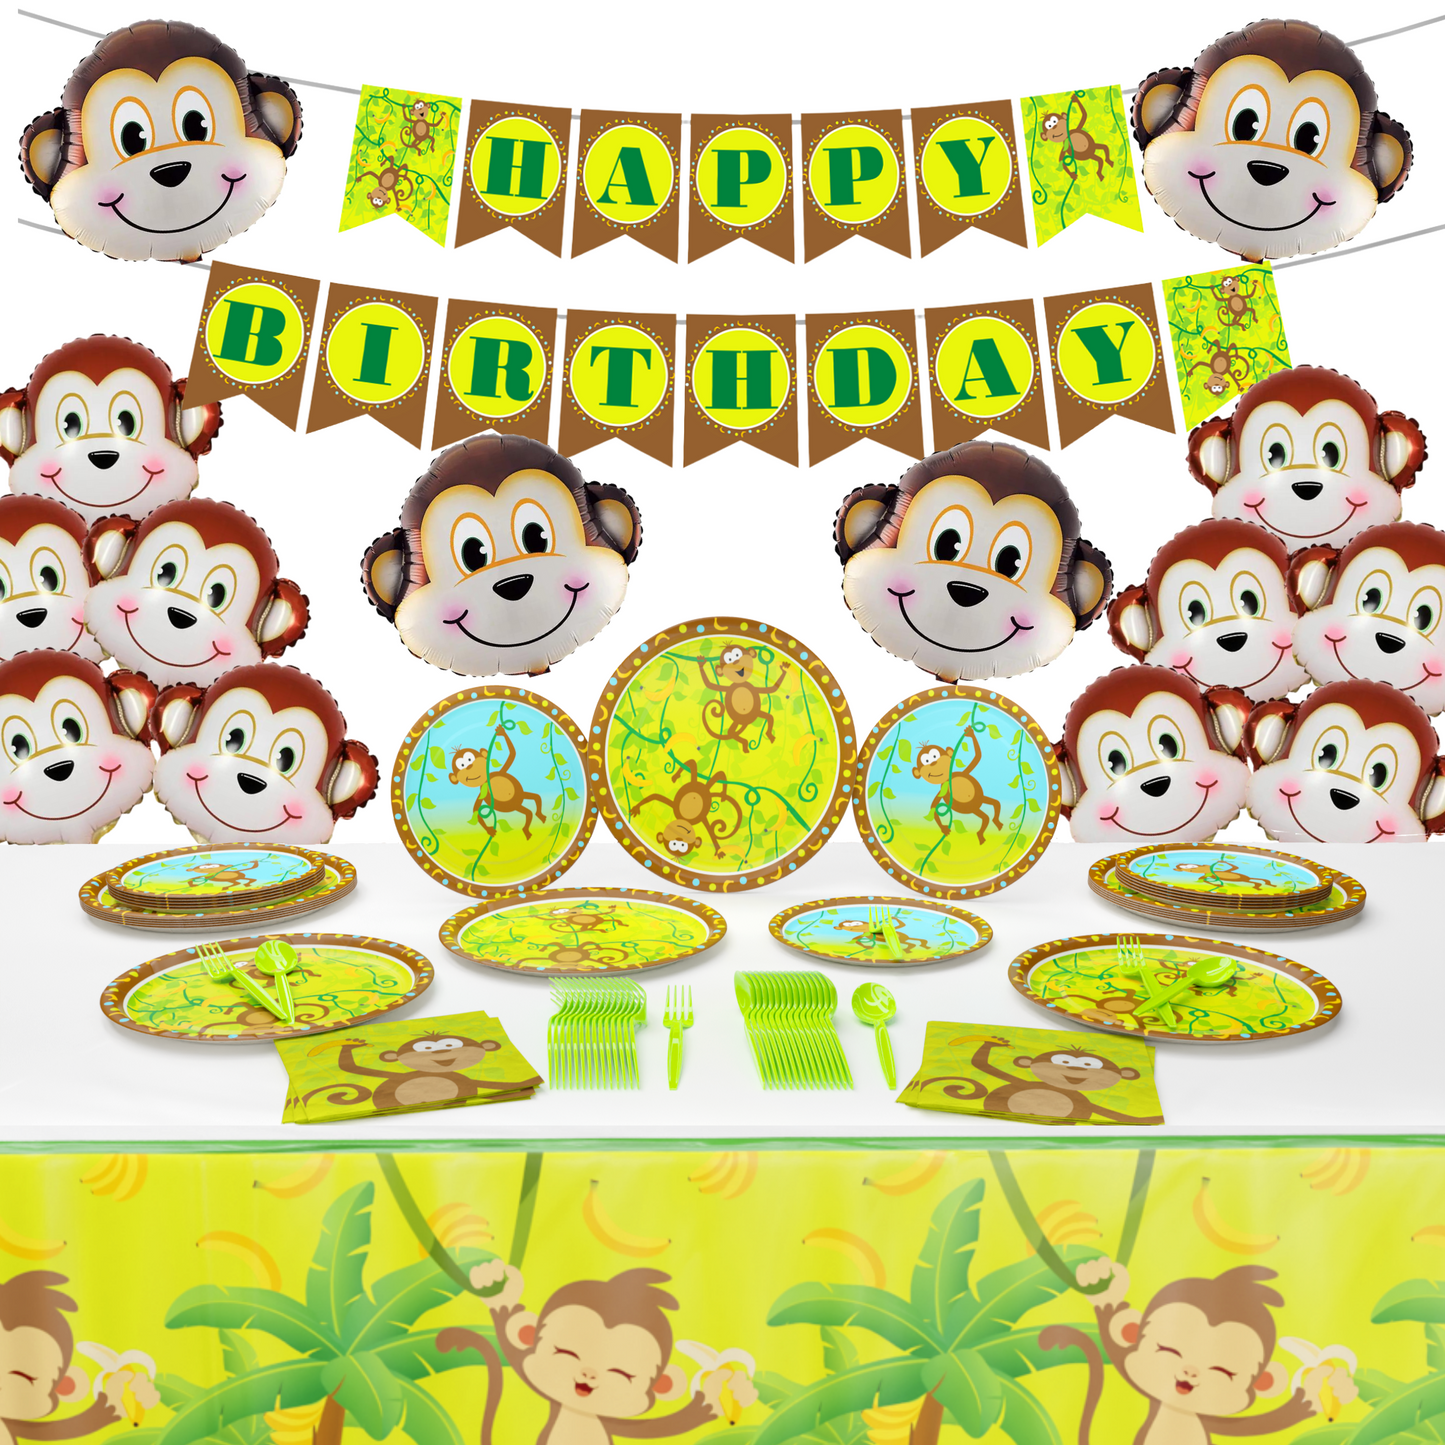 Monkey Party Deluxe Party Supplies Packs (For 16 Guests)